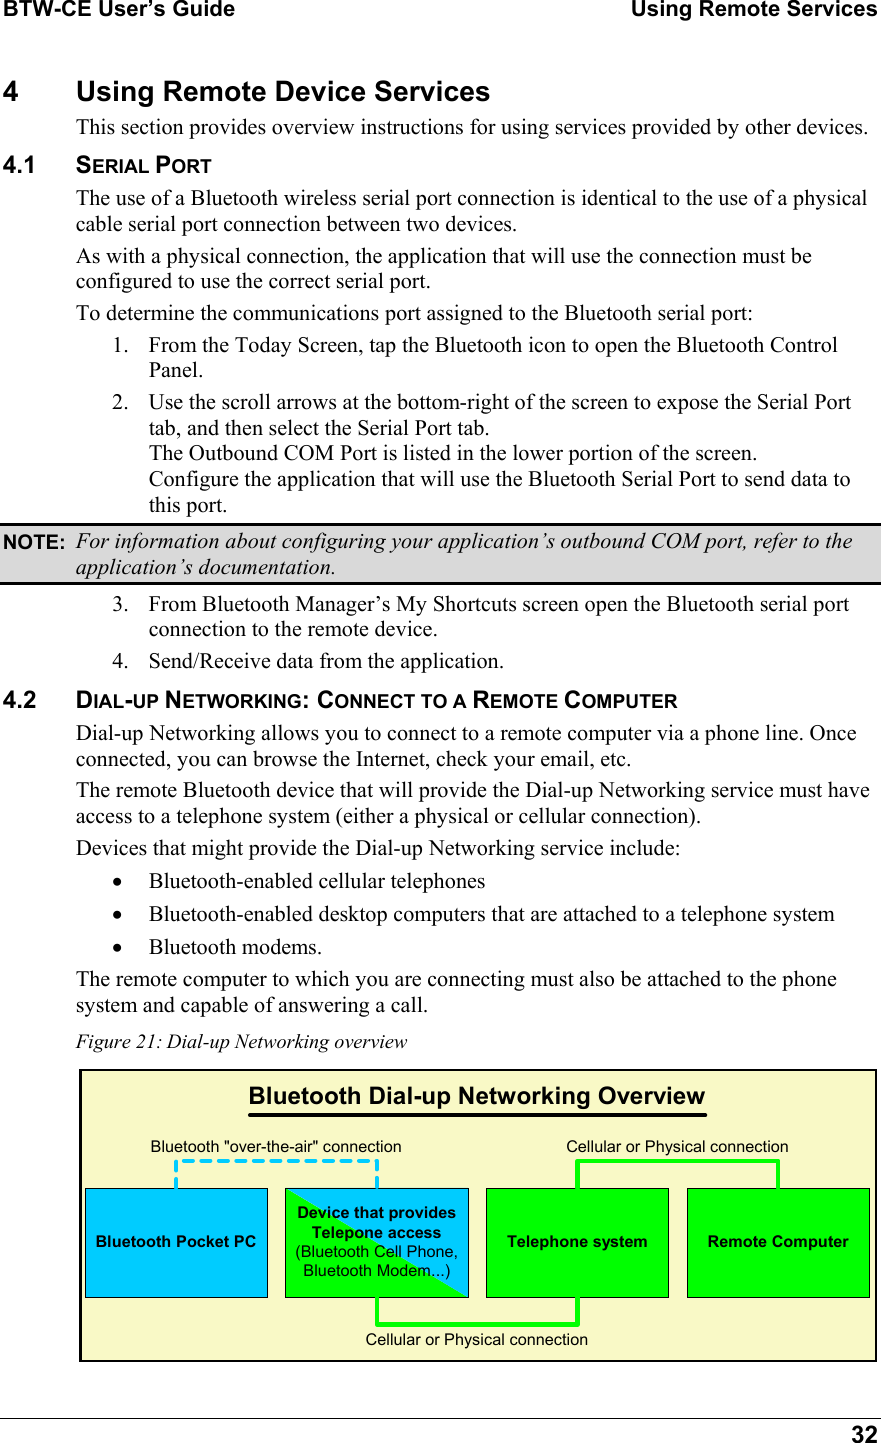 BTW-CE User’s Guide    Using Remote Services  32 4  Using Remote Device Services This section provides overview instructions for using services provided by other devices. 4.1 SERIAL PORT The use of a Bluetooth wireless serial port connection is identical to the use of a physical cable serial port connection between two devices. As with a physical connection, the application that will use the connection must be configured to use the correct serial port.  To determine the communications port assigned to the Bluetooth serial port: 1.  From the Today Screen, tap the Bluetooth icon to open the Bluetooth Control Panel. 2.  Use the scroll arrows at the bottom-right of the screen to expose the Serial Port tab, and then select the Serial Port tab. The Outbound COM Port is listed in the lower portion of the screen.  Configure the application that will use the Bluetooth Serial Port to send data to this port.  NOTE:  For information about configuring your application’s outbound COM port, refer to the application’s documentation. 3.  From Bluetooth Manager’s My Shortcuts screen open the Bluetooth serial port connection to the remote device. 4.  Send/Receive data from the application. 4.2 DIAL-UP NETWORKING: CONNECT TO A REMOTE COMPUTER Dial-up Networking allows you to connect to a remote computer via a phone line. Once connected, you can browse the Internet, check your email, etc. The remote Bluetooth device that will provide the Dial-up Networking service must have access to a telephone system (either a physical or cellular connection). Devices that might provide the Dial-up Networking service include: •  Bluetooth-enabled cellular telephones •  Bluetooth-enabled desktop computers that are attached to a telephone system •  Bluetooth modems. The remote computer to which you are connecting must also be attached to the phone system and capable of answering a call. Figure 21: Dial-up Networking overview Bluetooth Pocket PCDevice that providesTelepone access(Bluetooth Cell Phone,Bluetooth Modem...)Telephone systemBluetooth &quot;over-the-air&quot; connectionRemote ComputerCellular or Physical connectionCellular or Physical connectionBluetooth Dial-up Networking Overview 